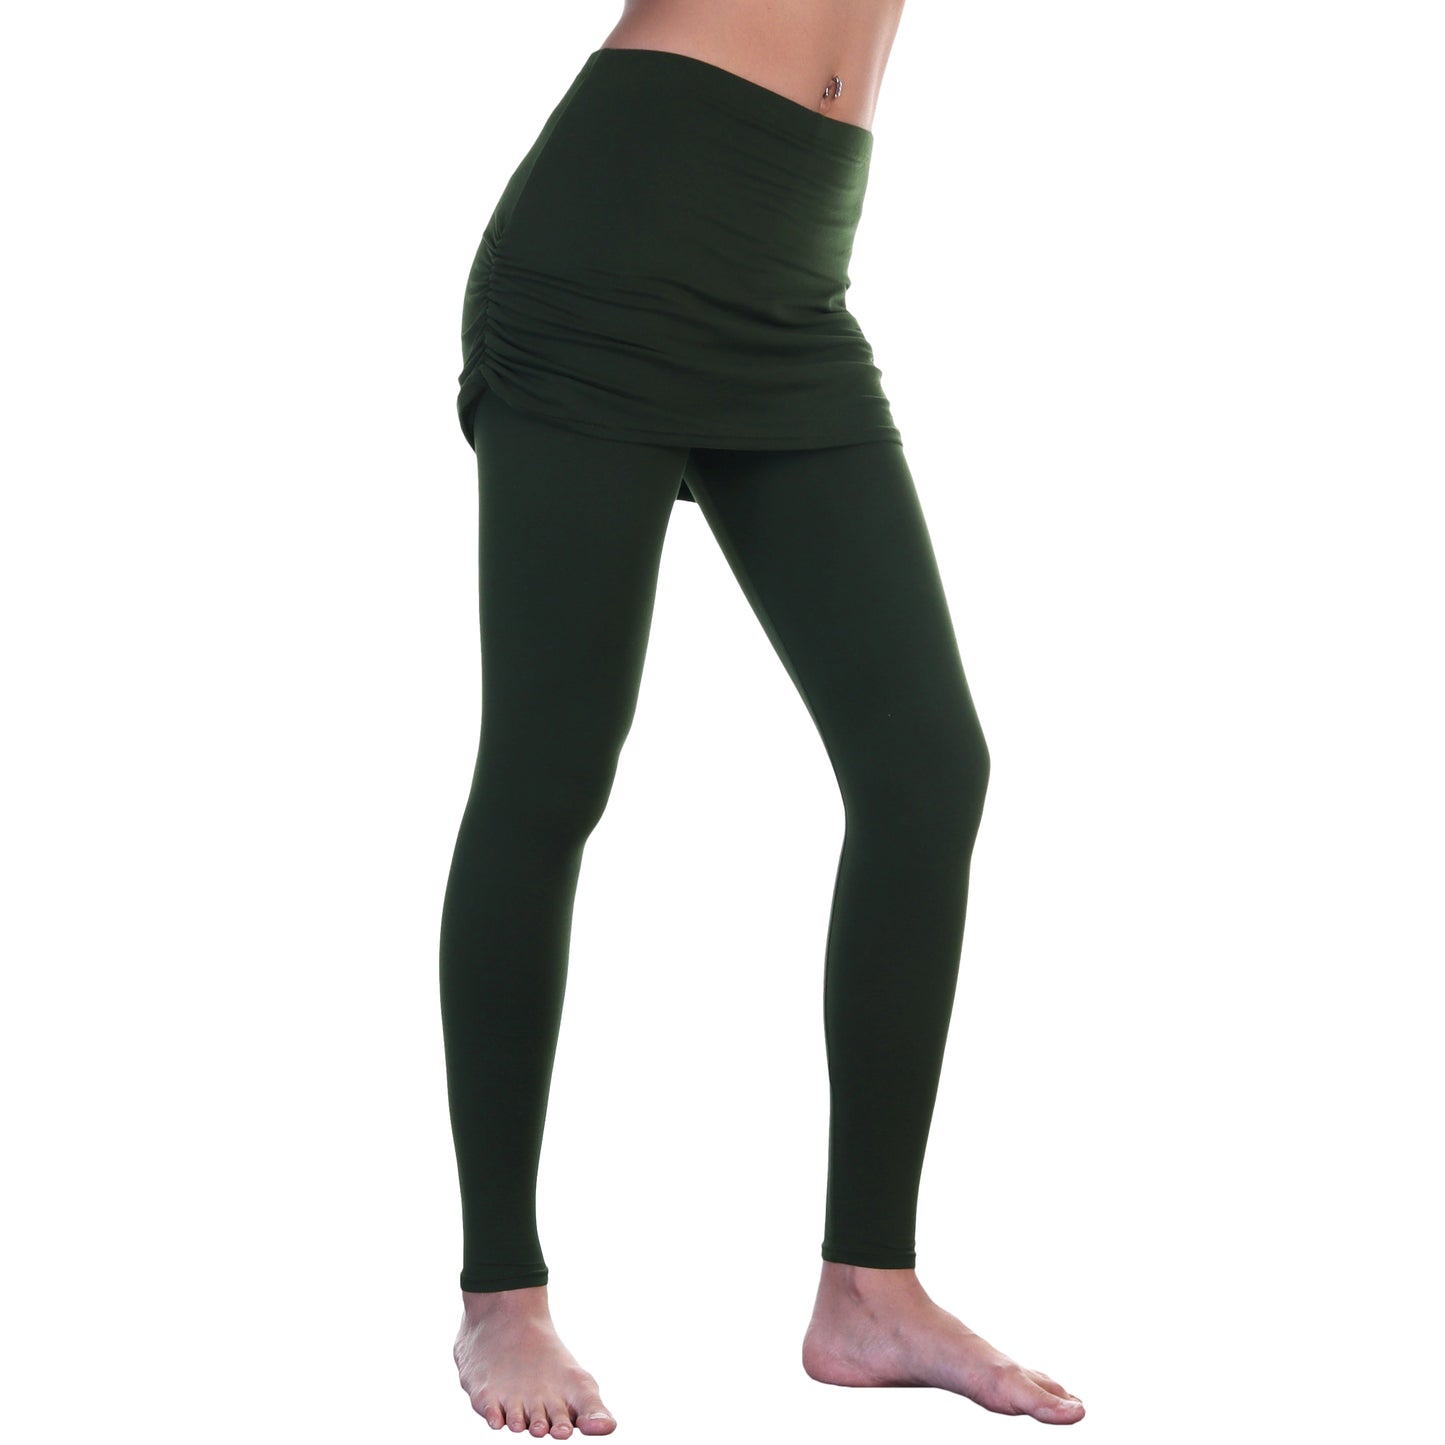 High Waist Leggings with Attached Mini Skirt (1-Pack)